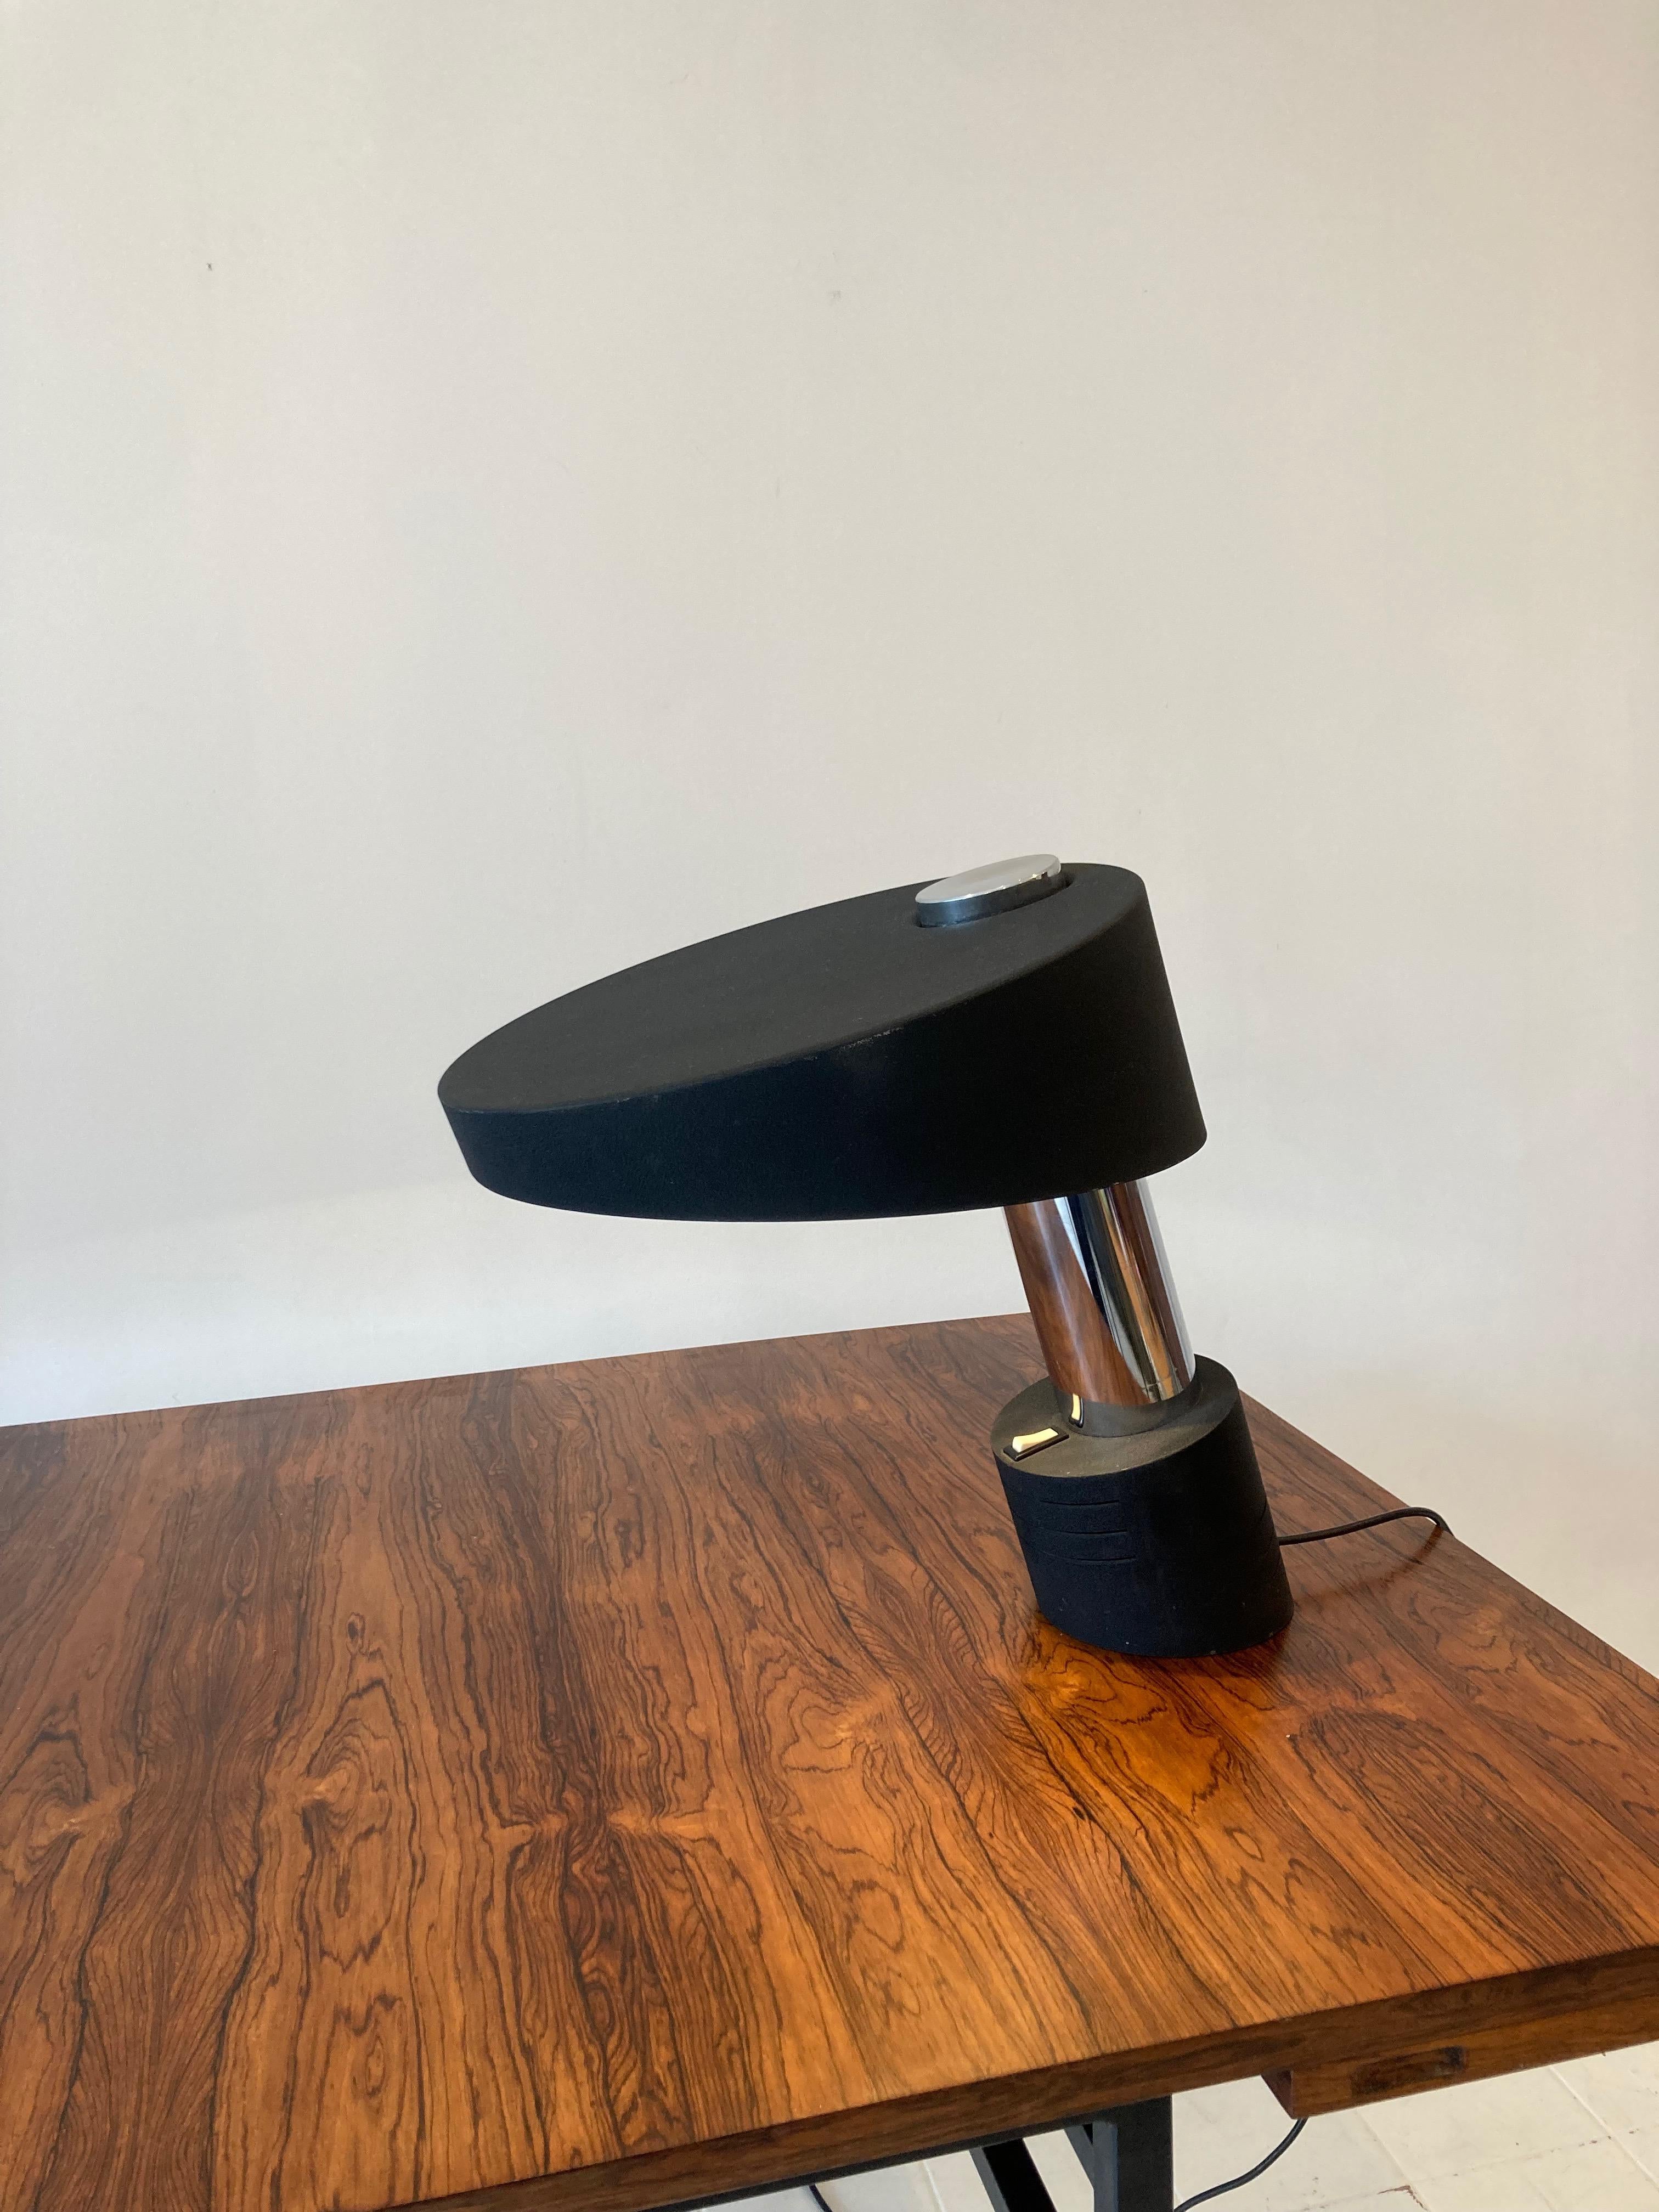 Table desk lamp.

Italy 1960 in chromed metal and black textured lacquered metal. Attributed to Mario Bellini for Targetti Sankey

Original electronics, very good condition. Some slight oxidation on the base.